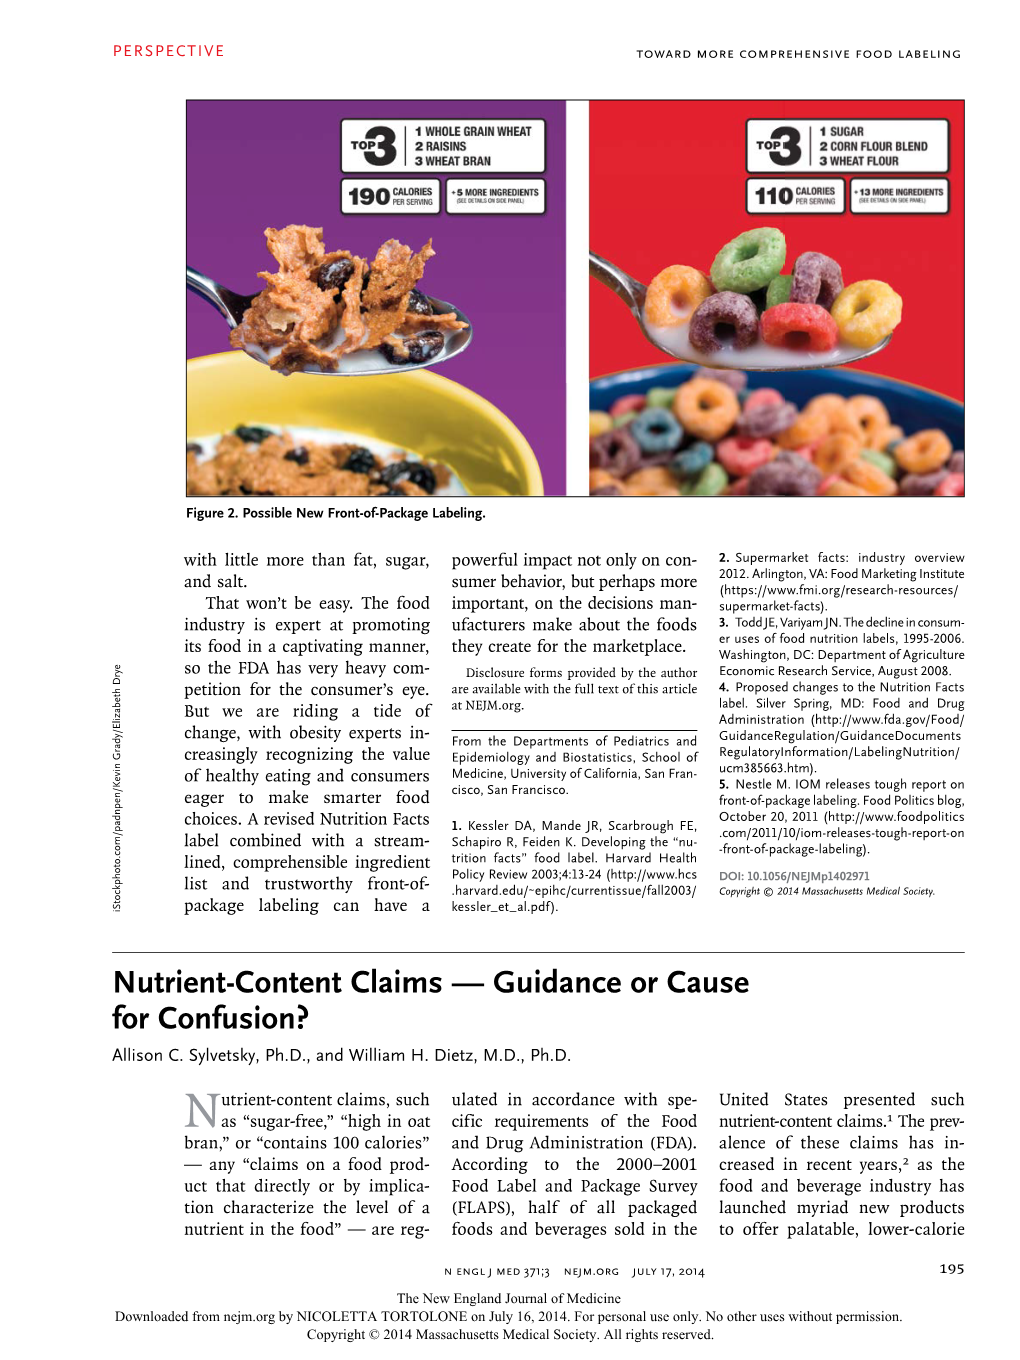 Nutrient-Content Claims — Guidance Or Cause for Confusion? Allison C